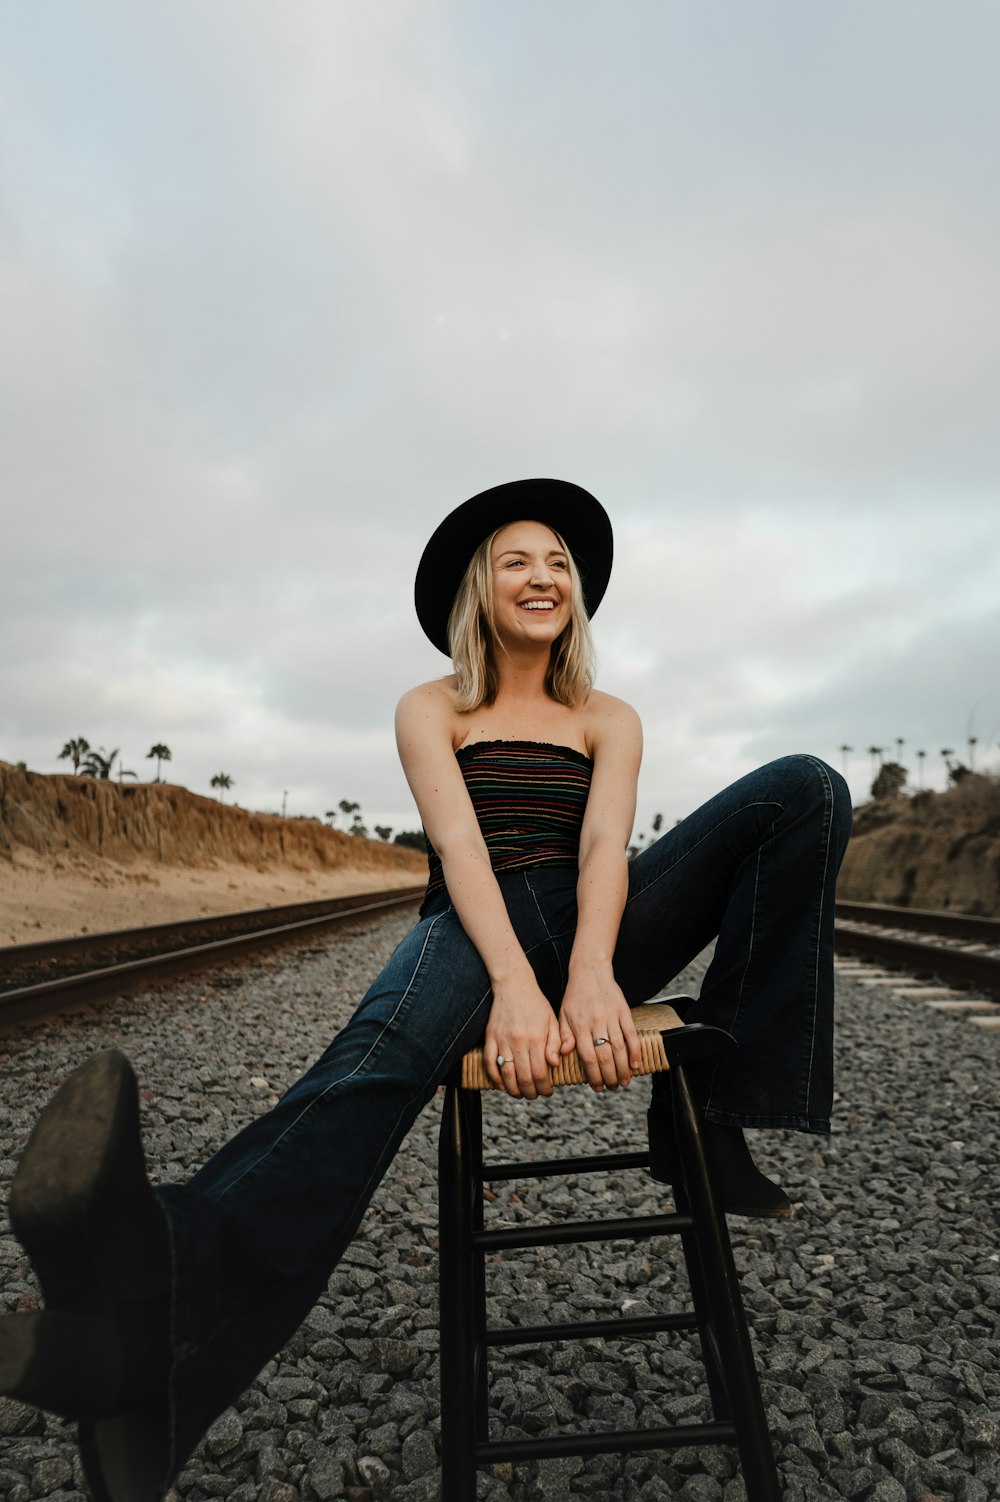 woman sitting on stool in the middle of train rails during cloudy day